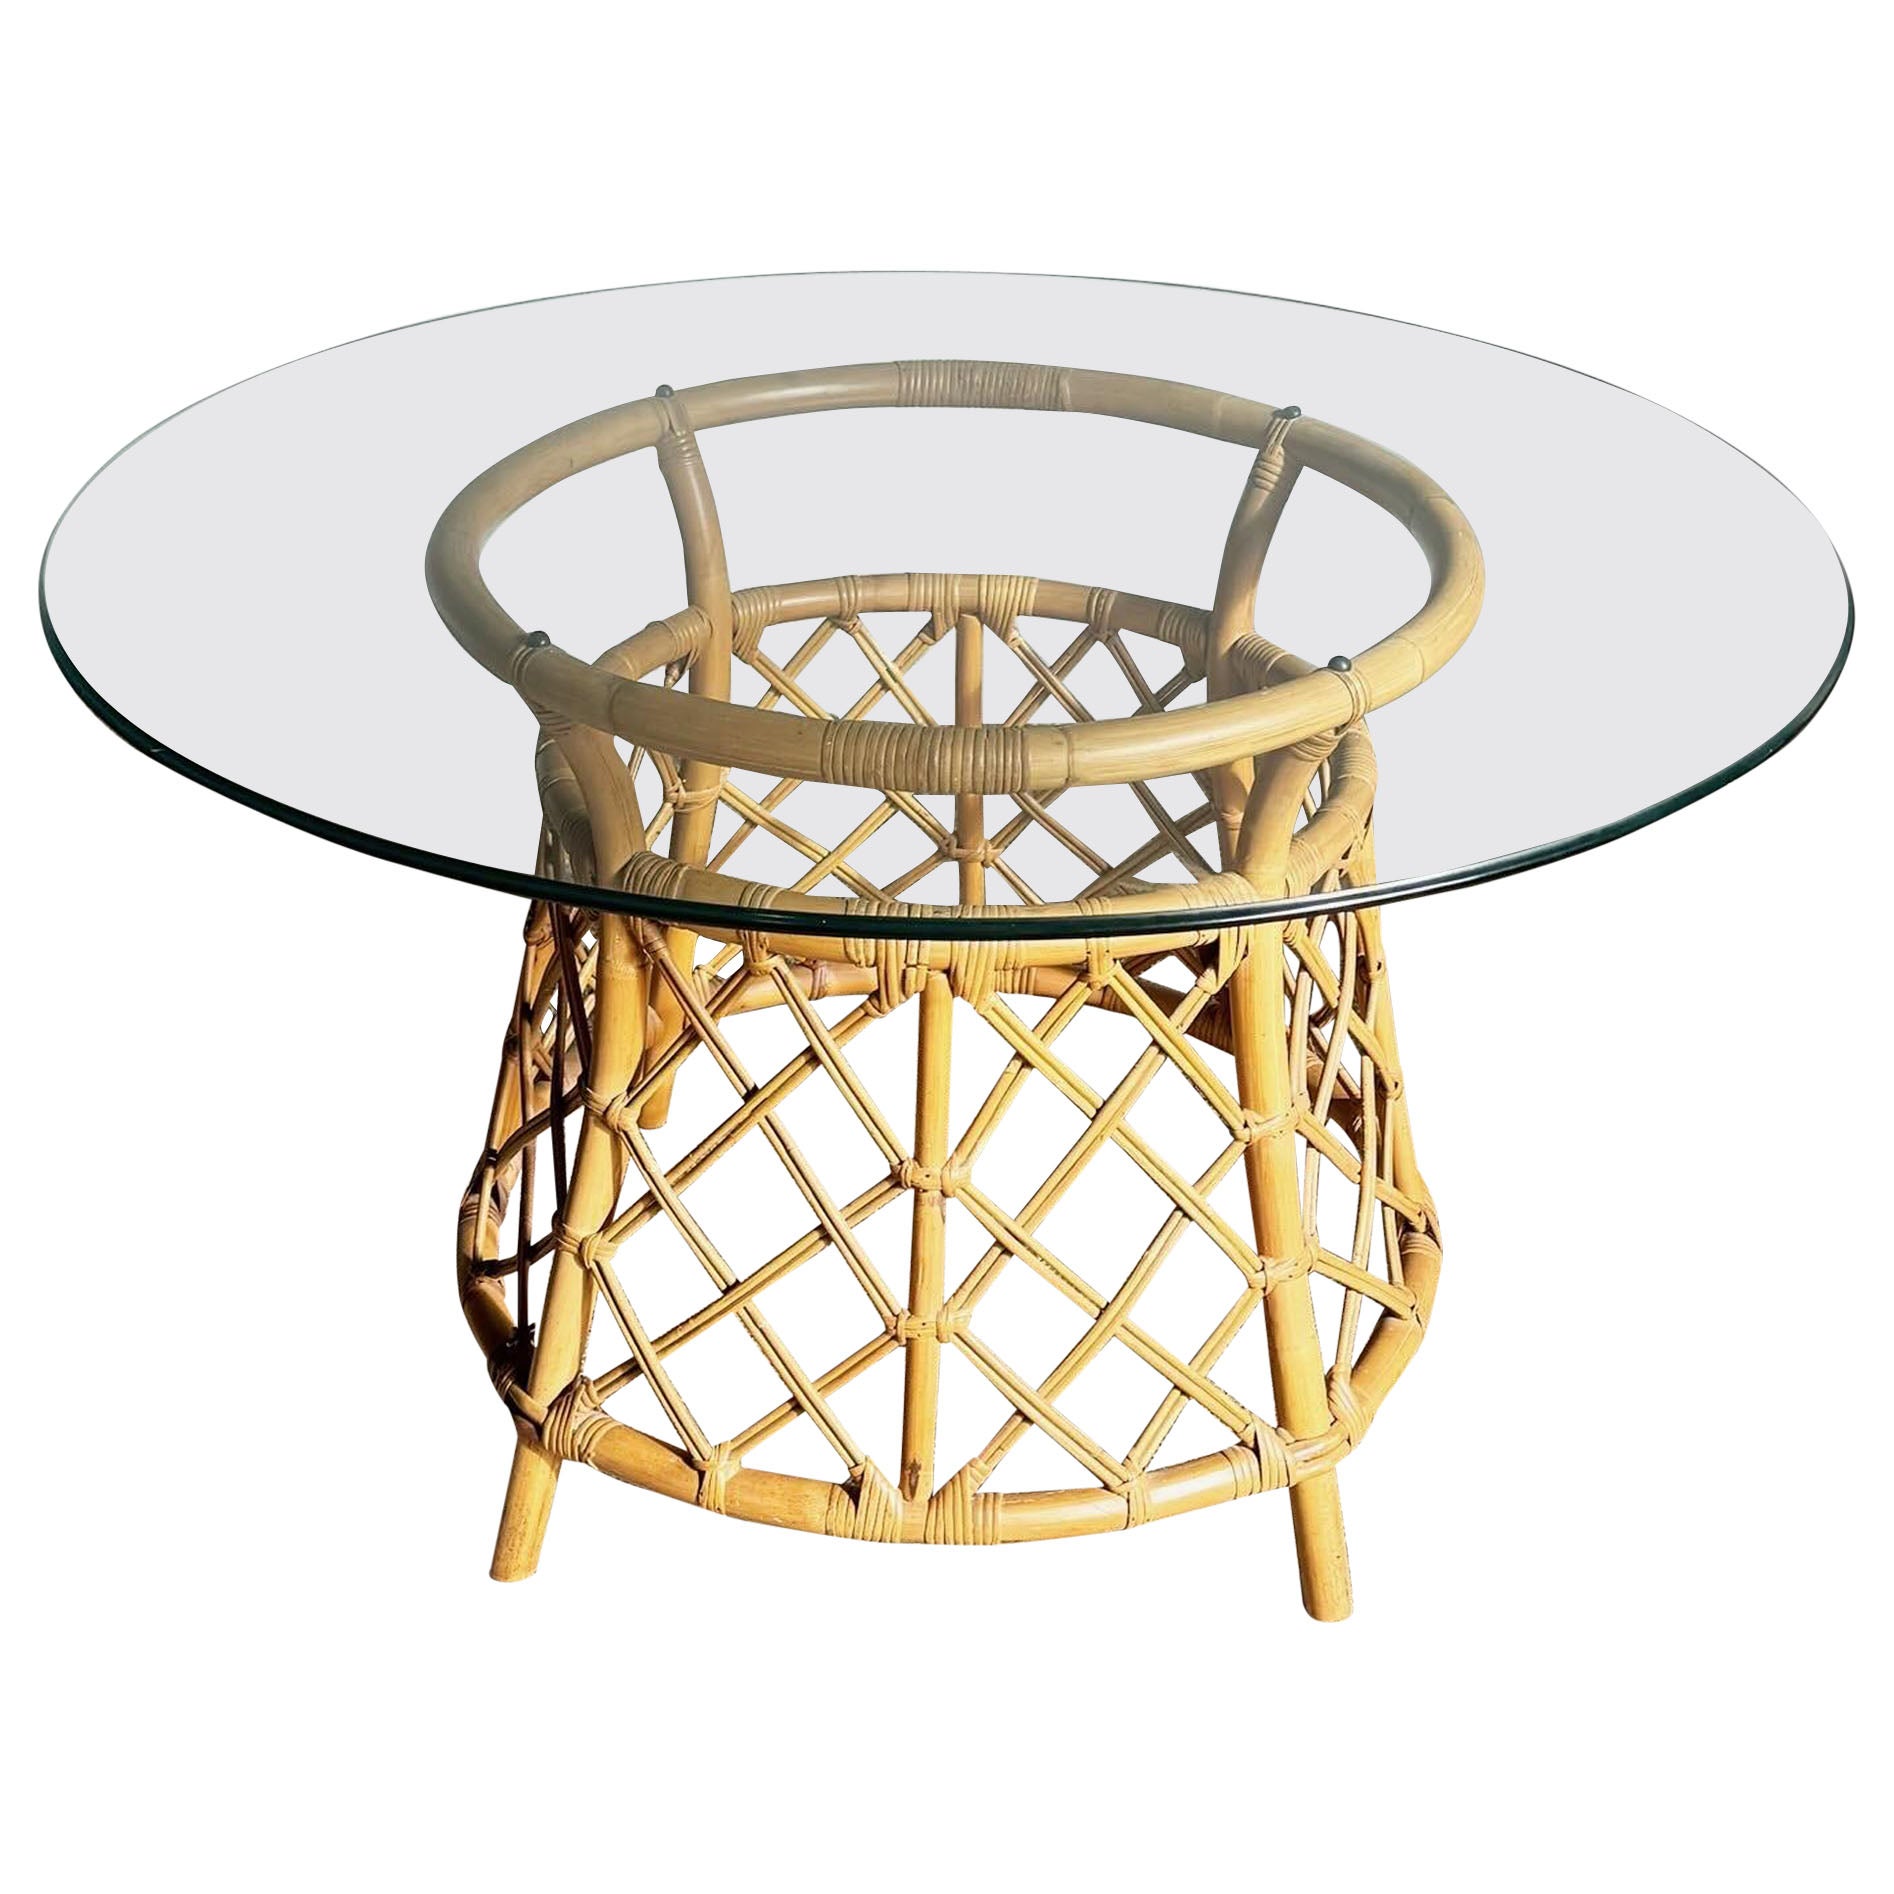 Boho Chic Bamboo Rattan Circular Glass Top Dining Table by Ficks Reed For Sale